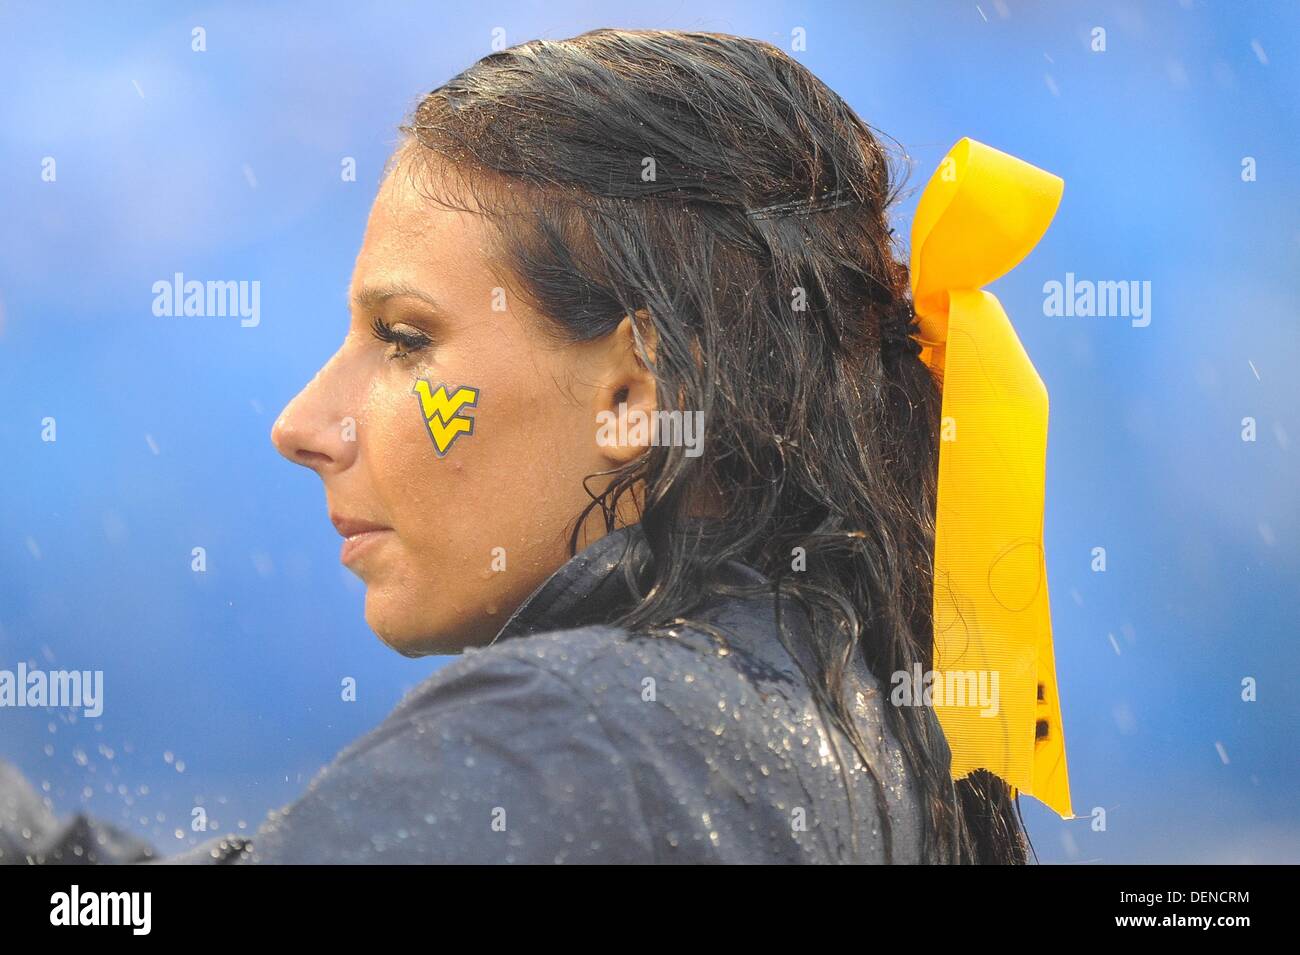 Baltimore, MD, USA. 21st Sep, 2013. A Mountaineer cheerleader watches her team as she gets soaked from the heavy rain during a match up between the Maryland Terrapins and the West Virginia Mountaineers at M&T Bank Stadium in Baltimore, MD. The Terrapins shut out the Mountaineers 37-0. Credit:  Cal Sport Media/Alamy Live News Stock Photo